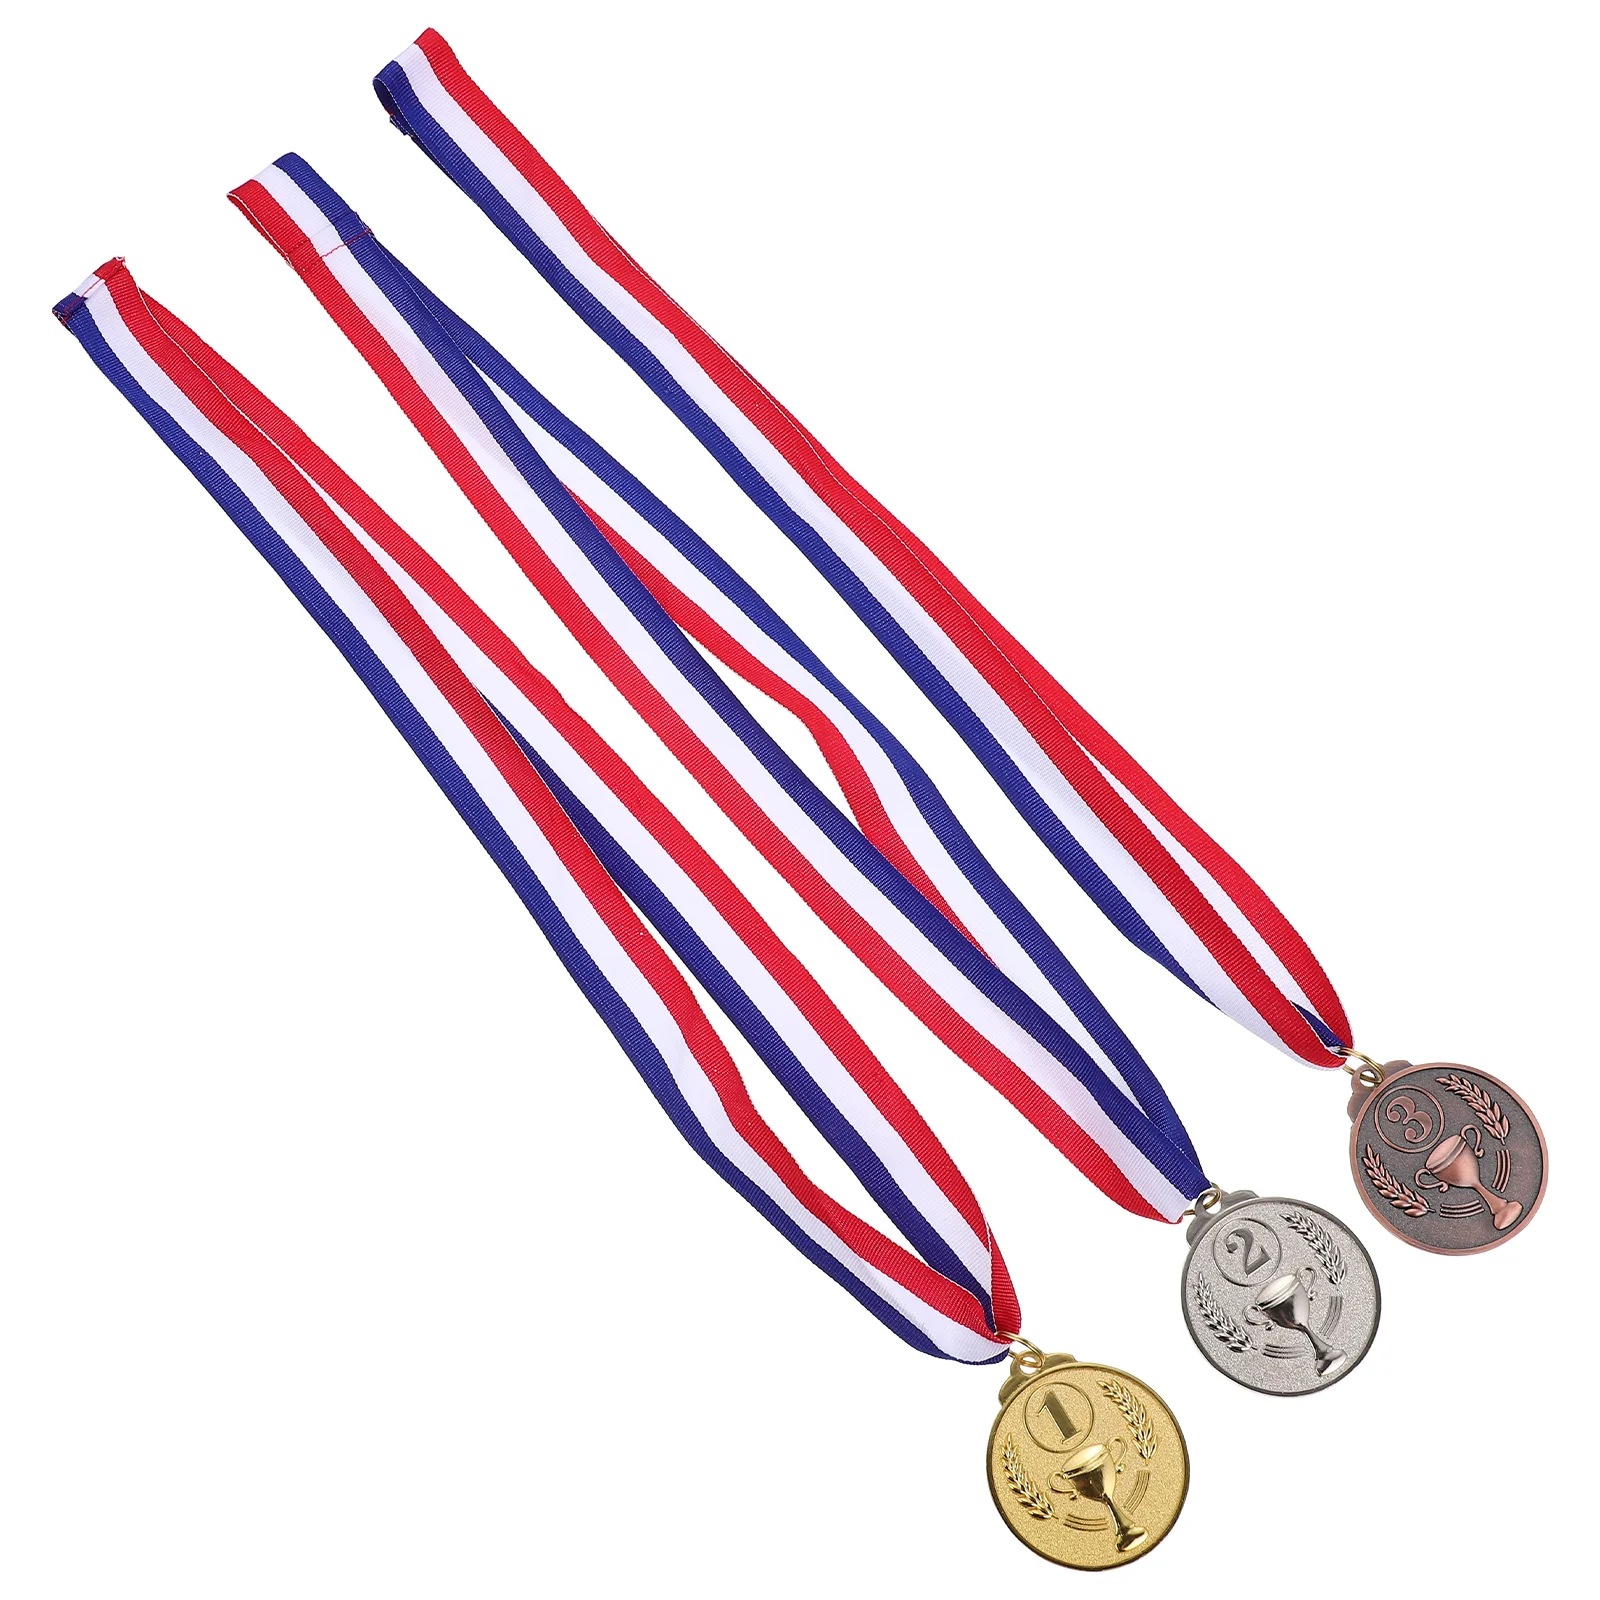 3 Pieces Silver Award Medals with Ribbon, Medals Prizes for Sports Soccer Basketball Gymnastics Medal for Kids Boys